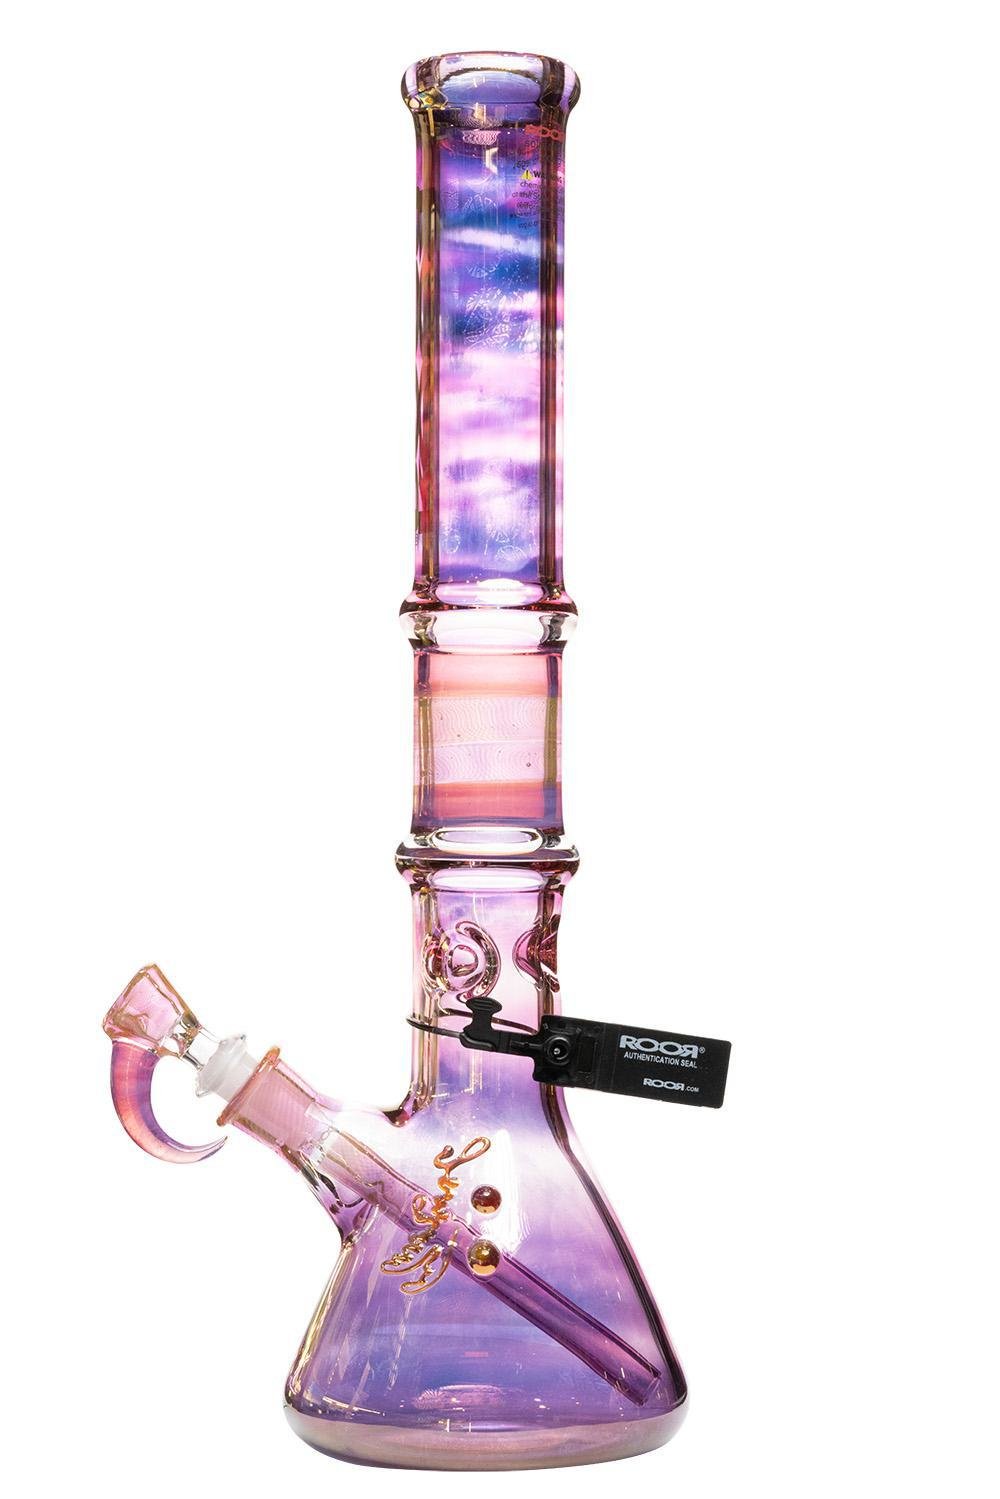 Roor Chase Adams Gold Fume 18 Beaker Style 1 | Stogz | Find Your High